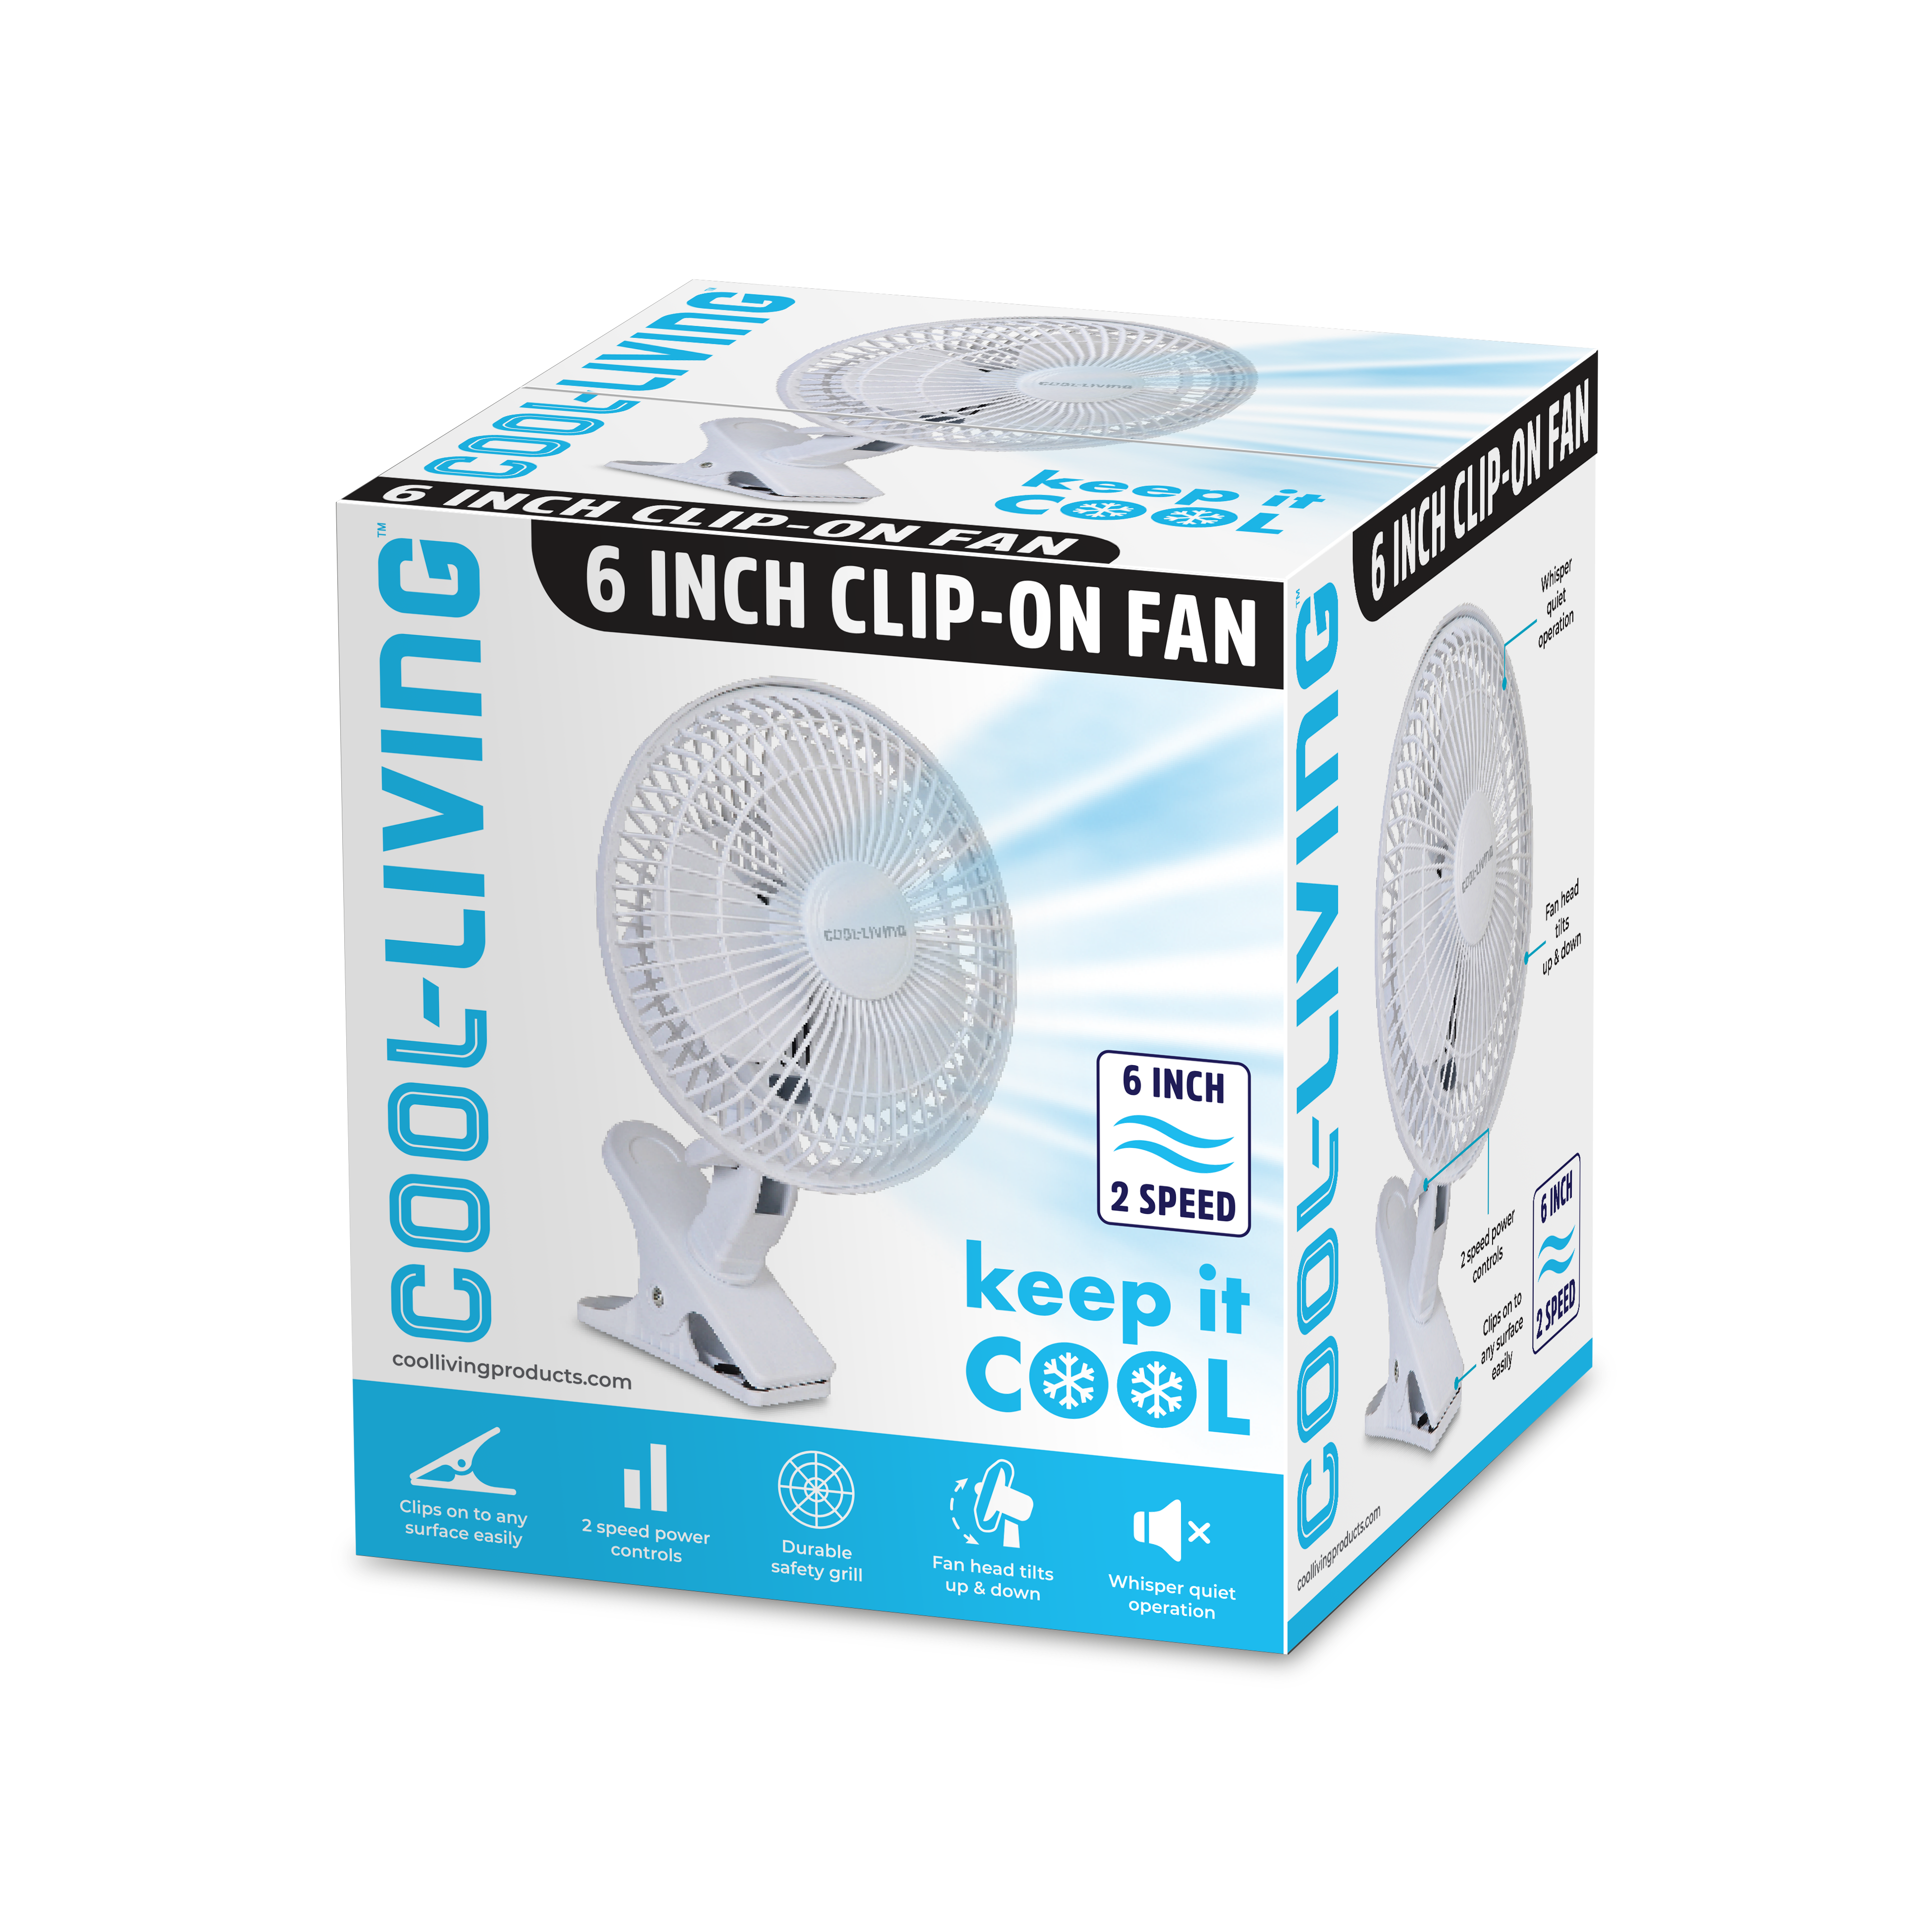 2 Speed Clip-on Fan 6 inch, with Strong Clamp, Powerful Airflow & Adjustable Tilt